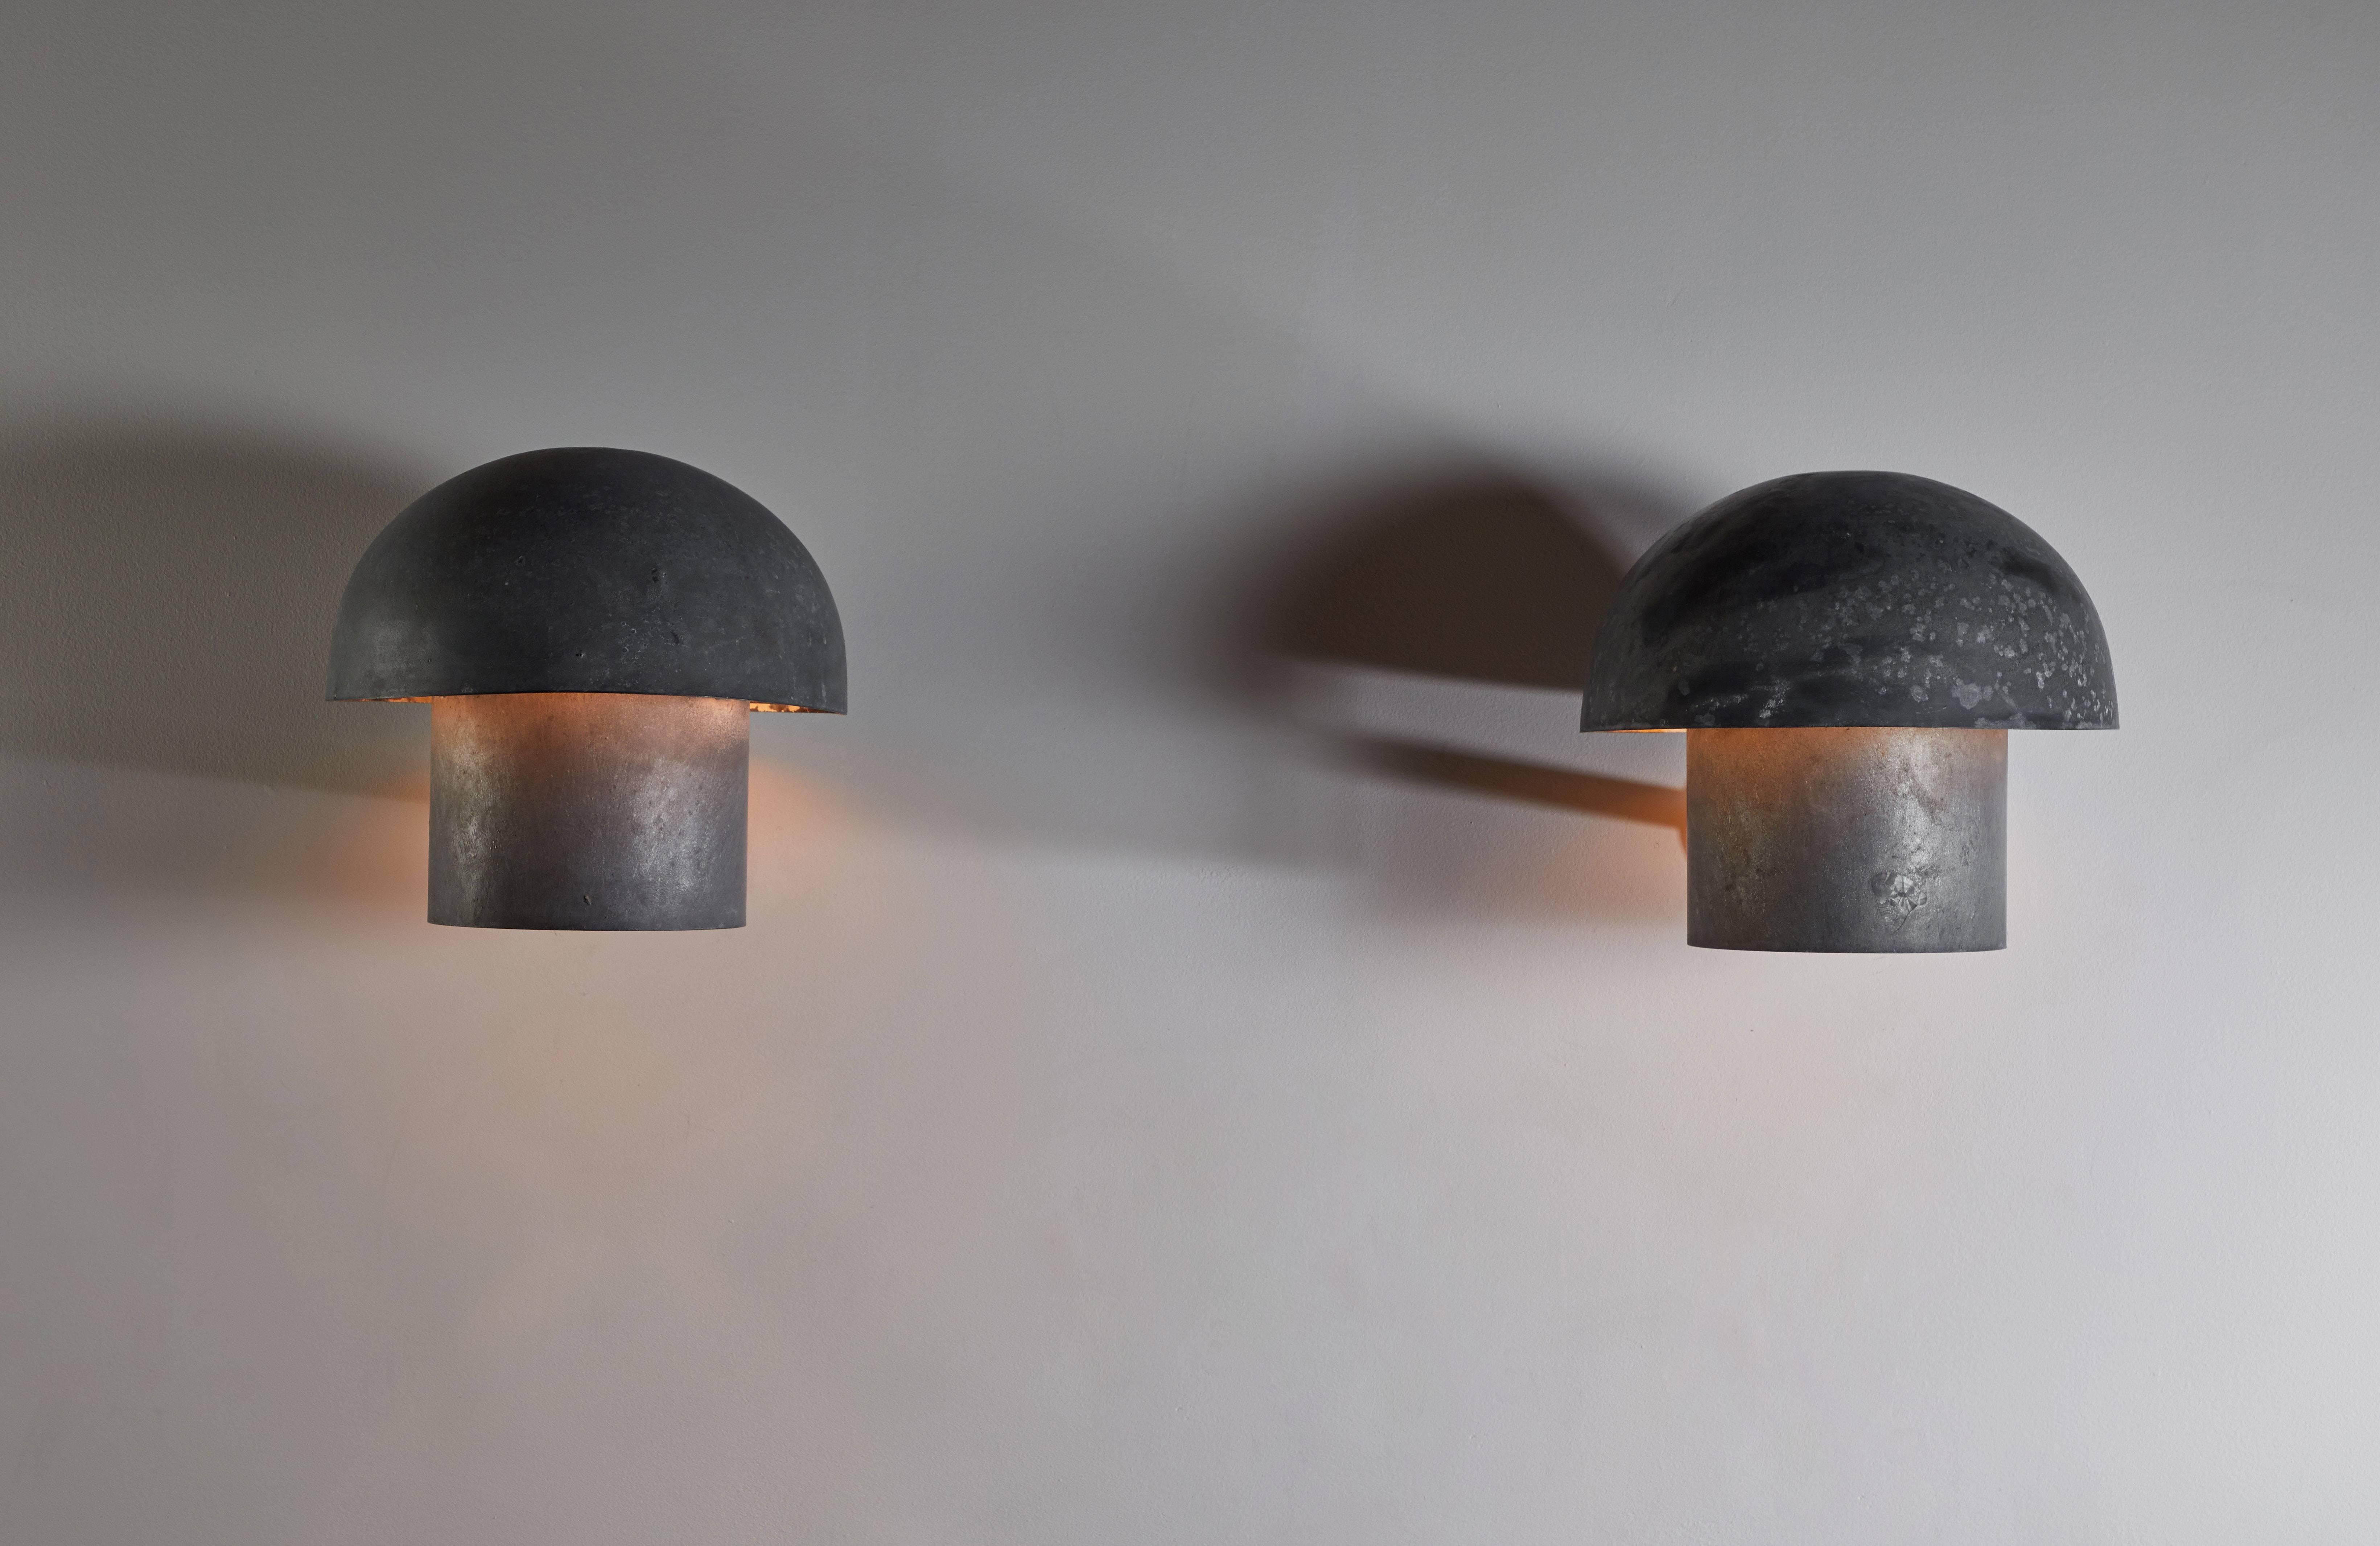 Pair of interior or exterior wall lights designed in Scandinavia, circa 1960s. Made of galvanized steel. Wired for US junction boxes. Each light takes one E27 100w maximum bulb.